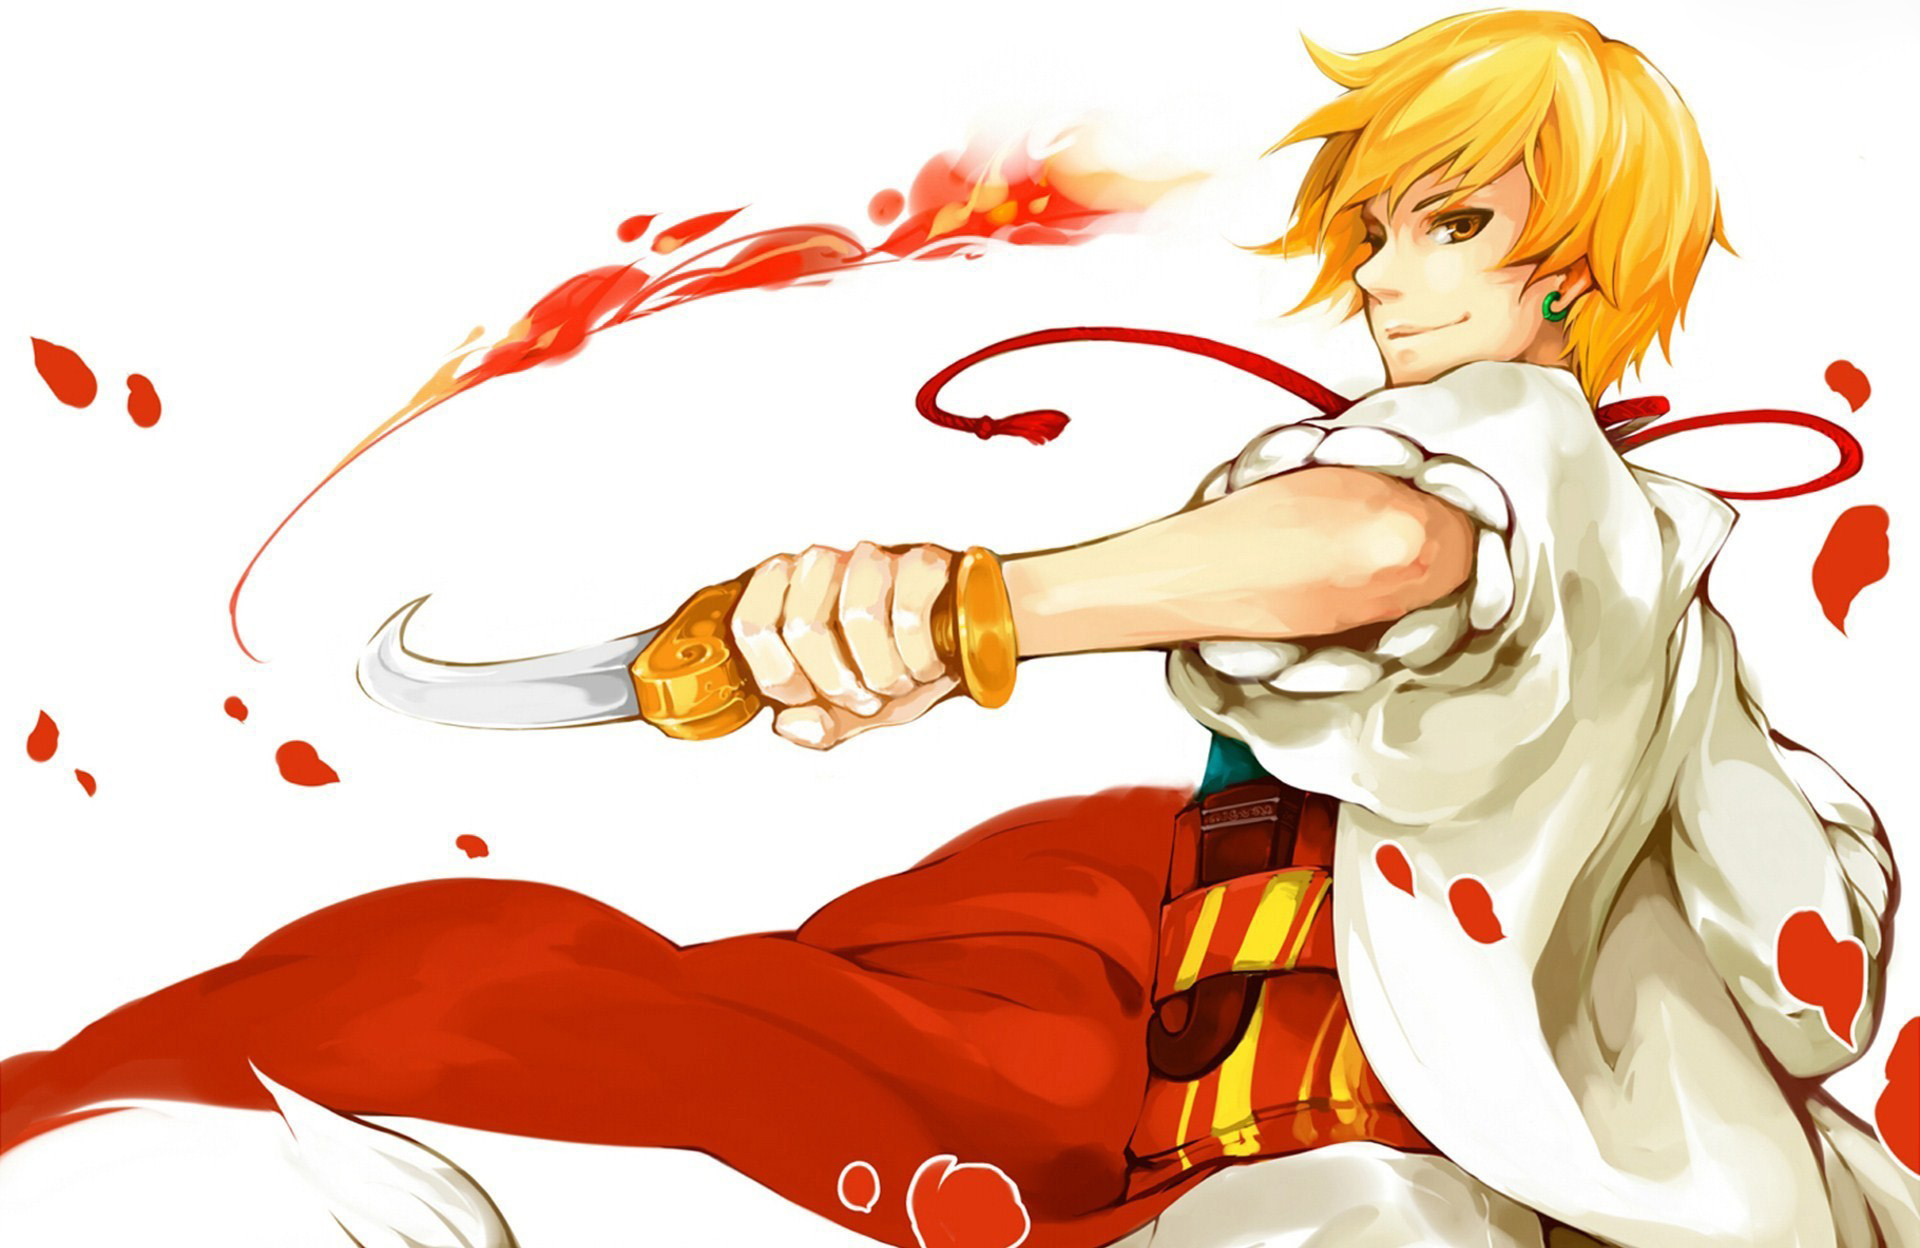 Anime Boy Free Download High Definition Wallpapers - Magic Anime Boy With Blonde Hair - HD Wallpaper 